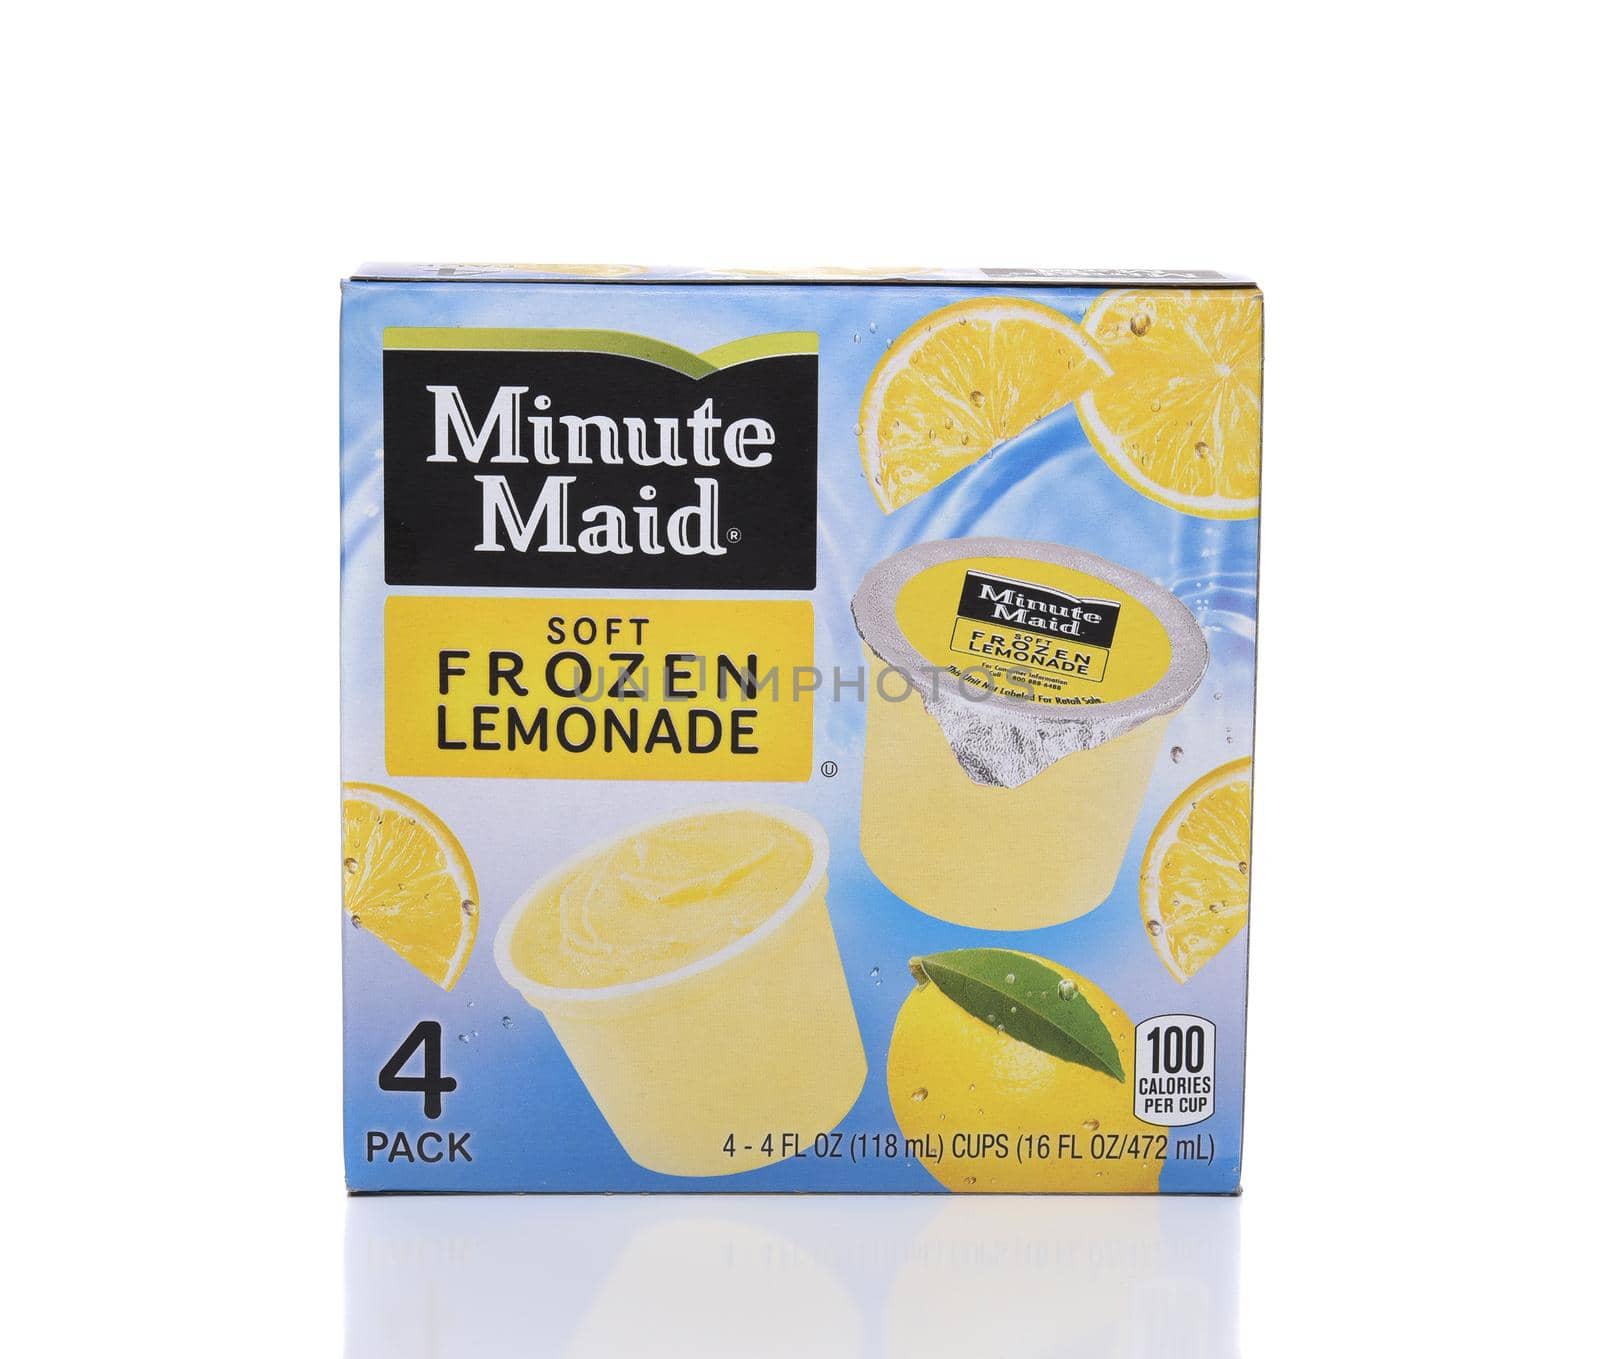 IRVINE, CA - SEPTEMBER 22, 2017: Minute Maid Soft Frozen Lemonade Cups. Minute Maid is a registered trademark of the Coca-Cola Company.